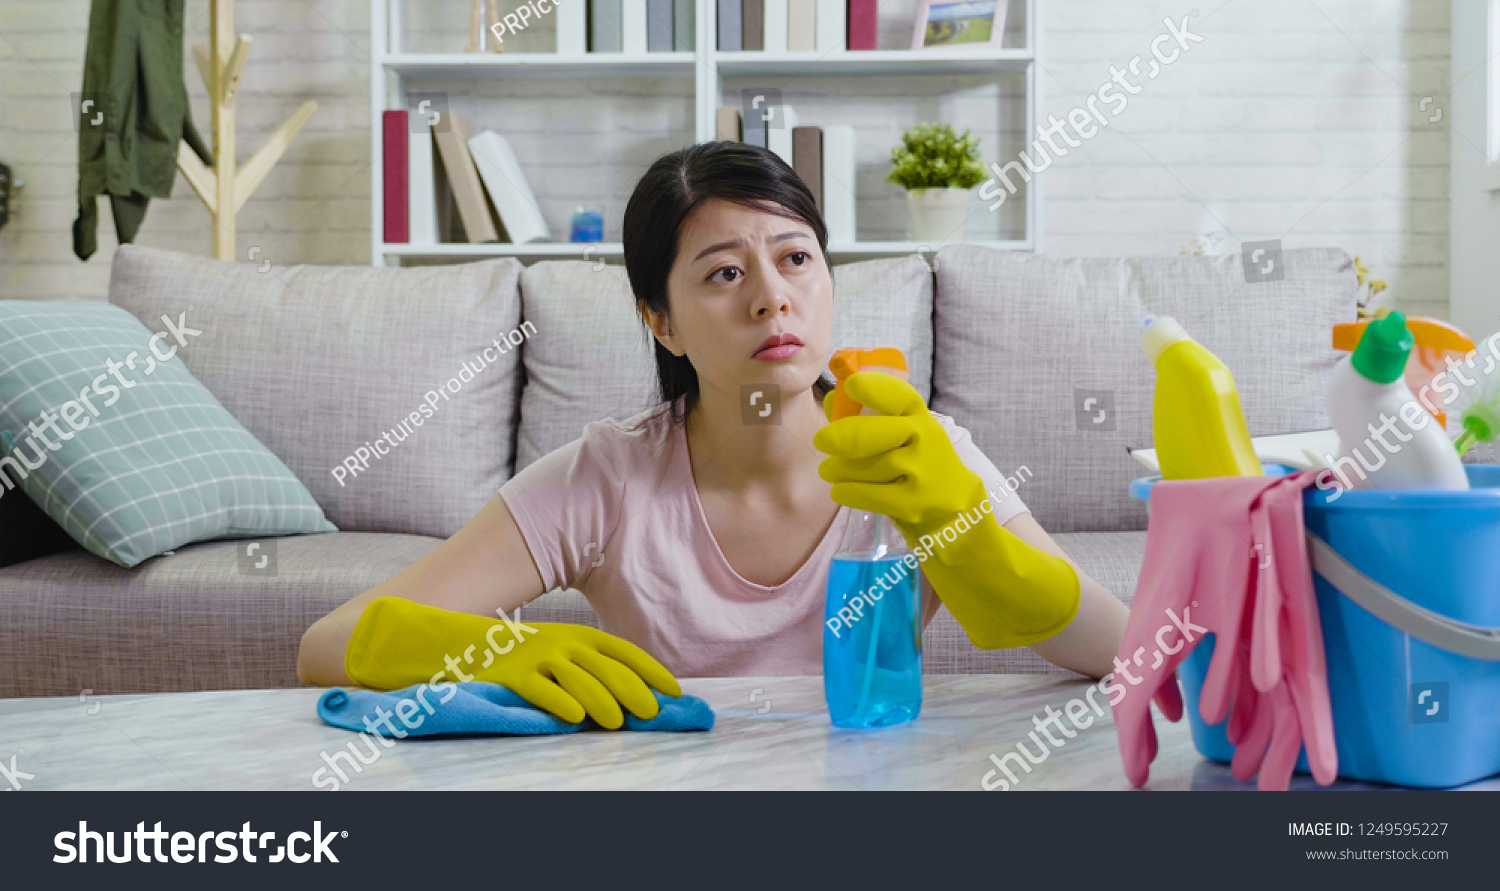 Exhausted asian housewife looking outside the house from window to the urban city view. young lady sitting on floor resting while doing housework wiping table. elegant woman wearing gloves cleaning. #1249595227